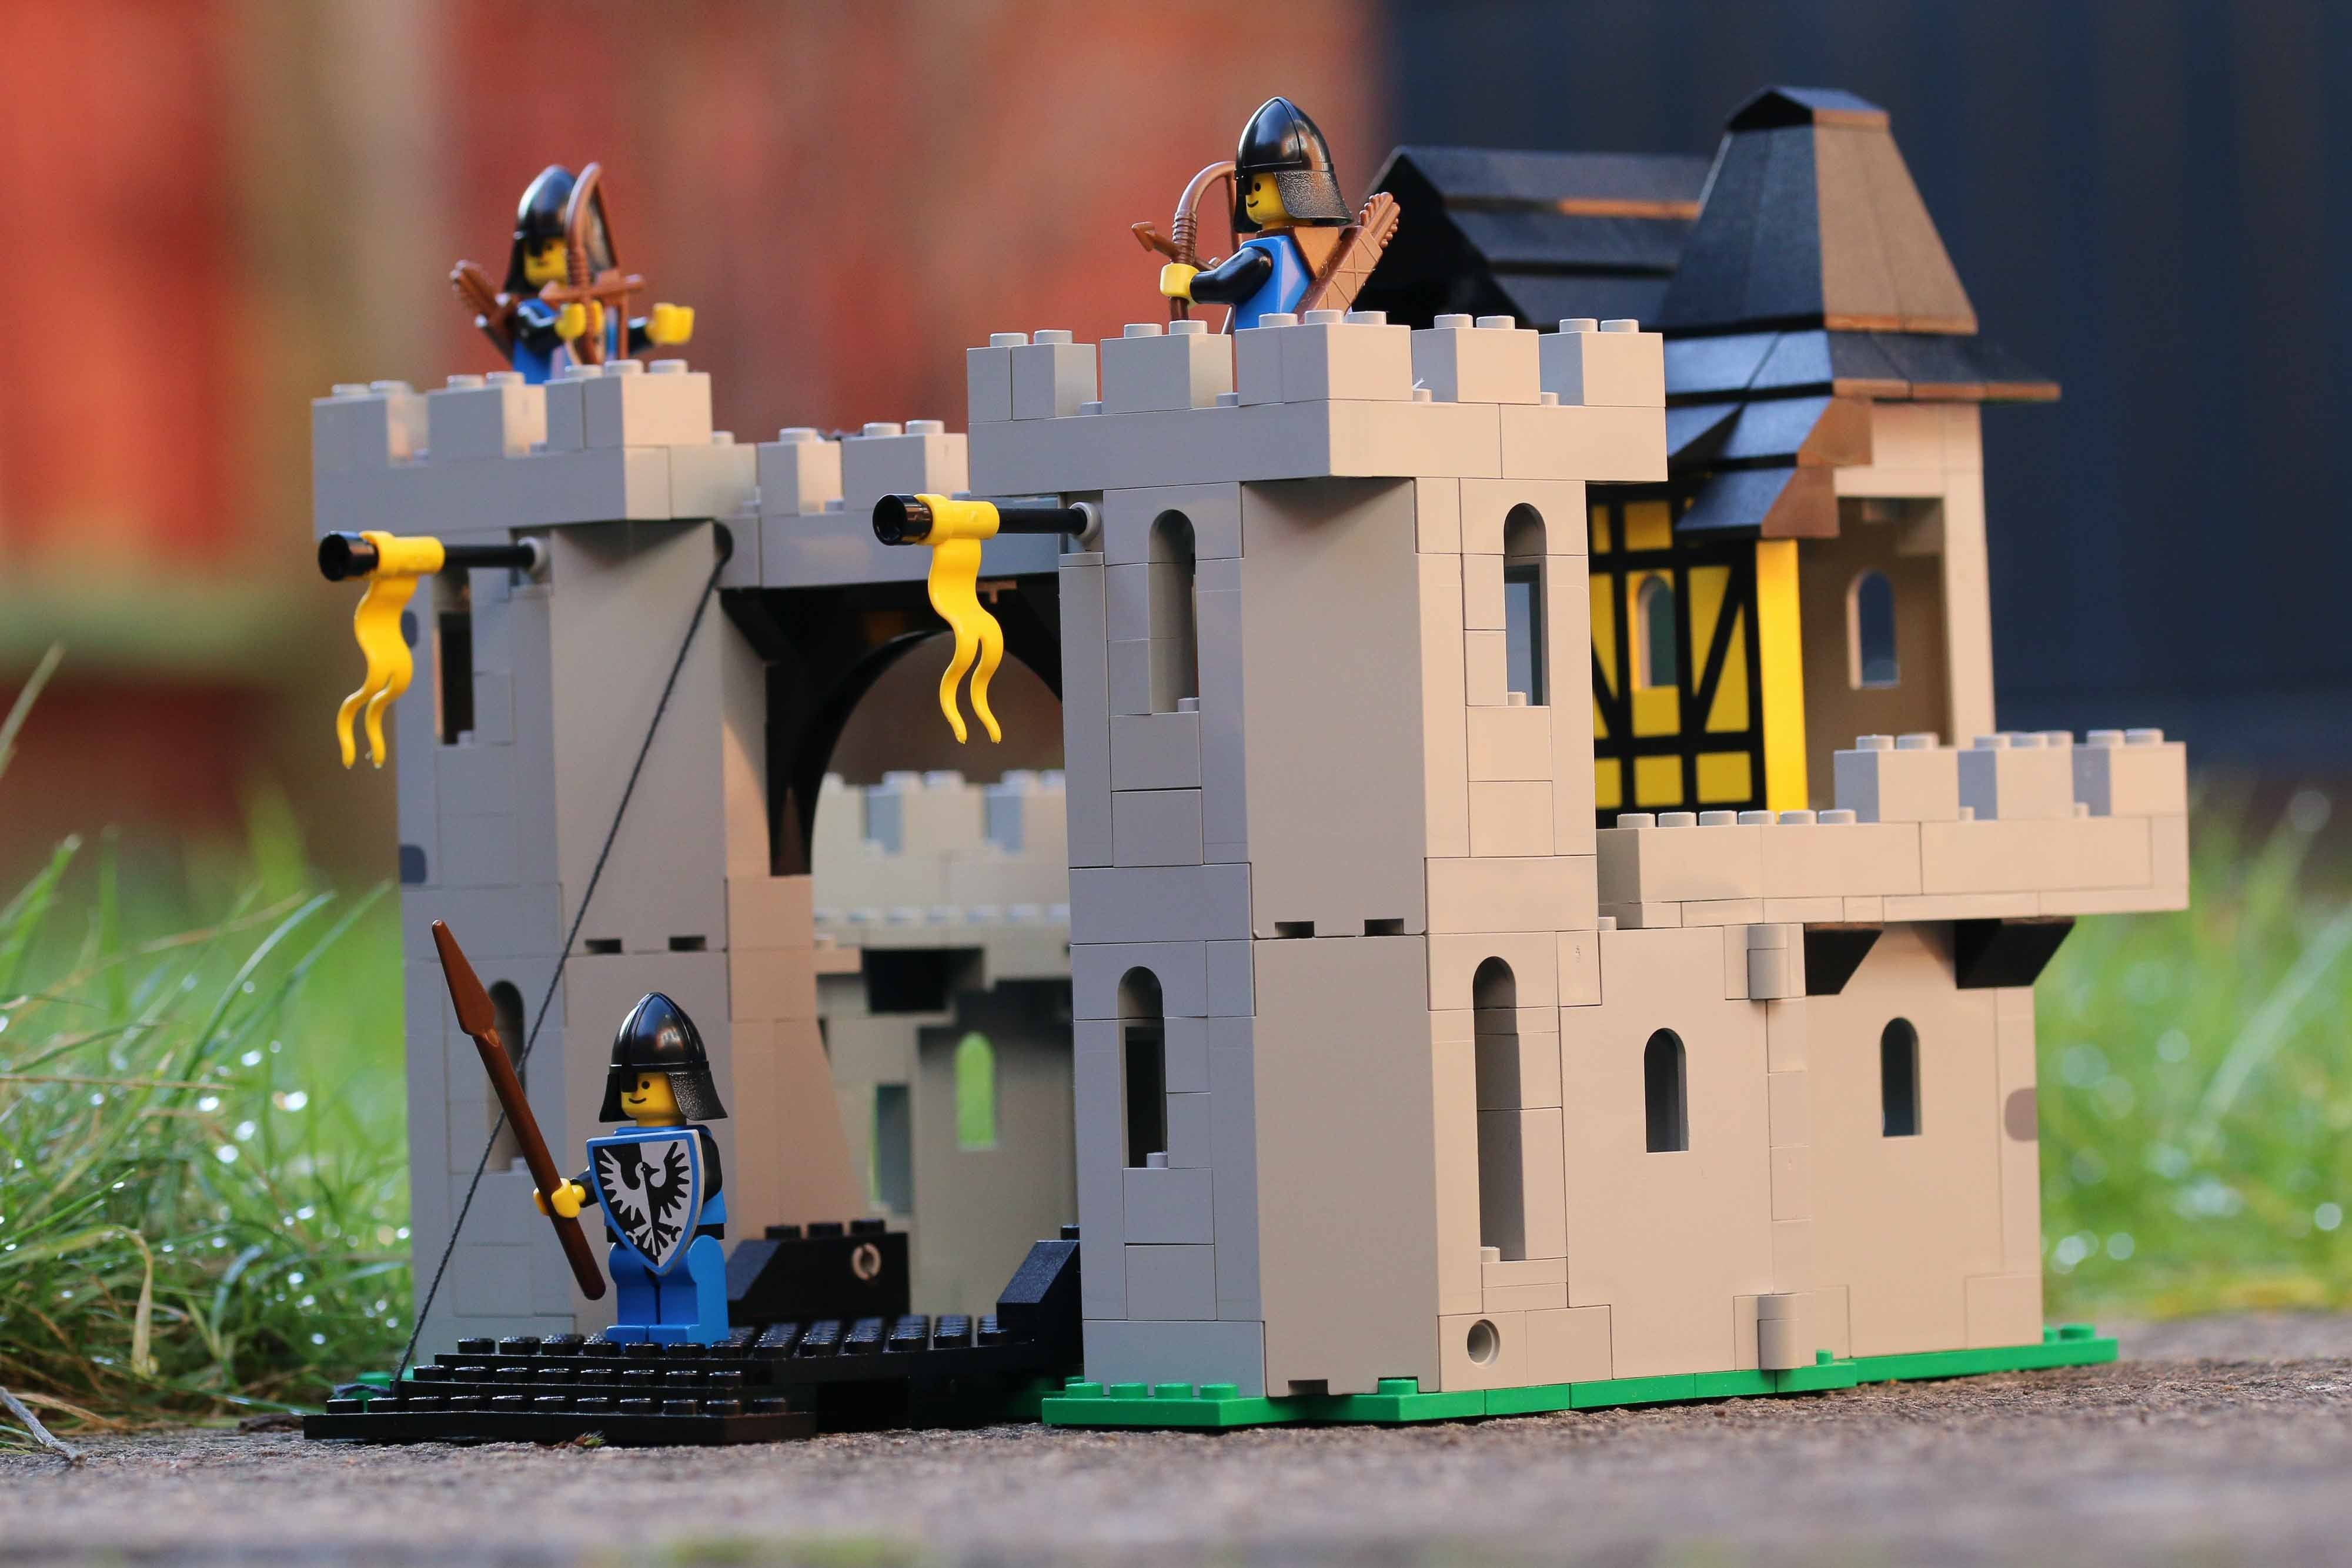 Welcome to the Lego Castle